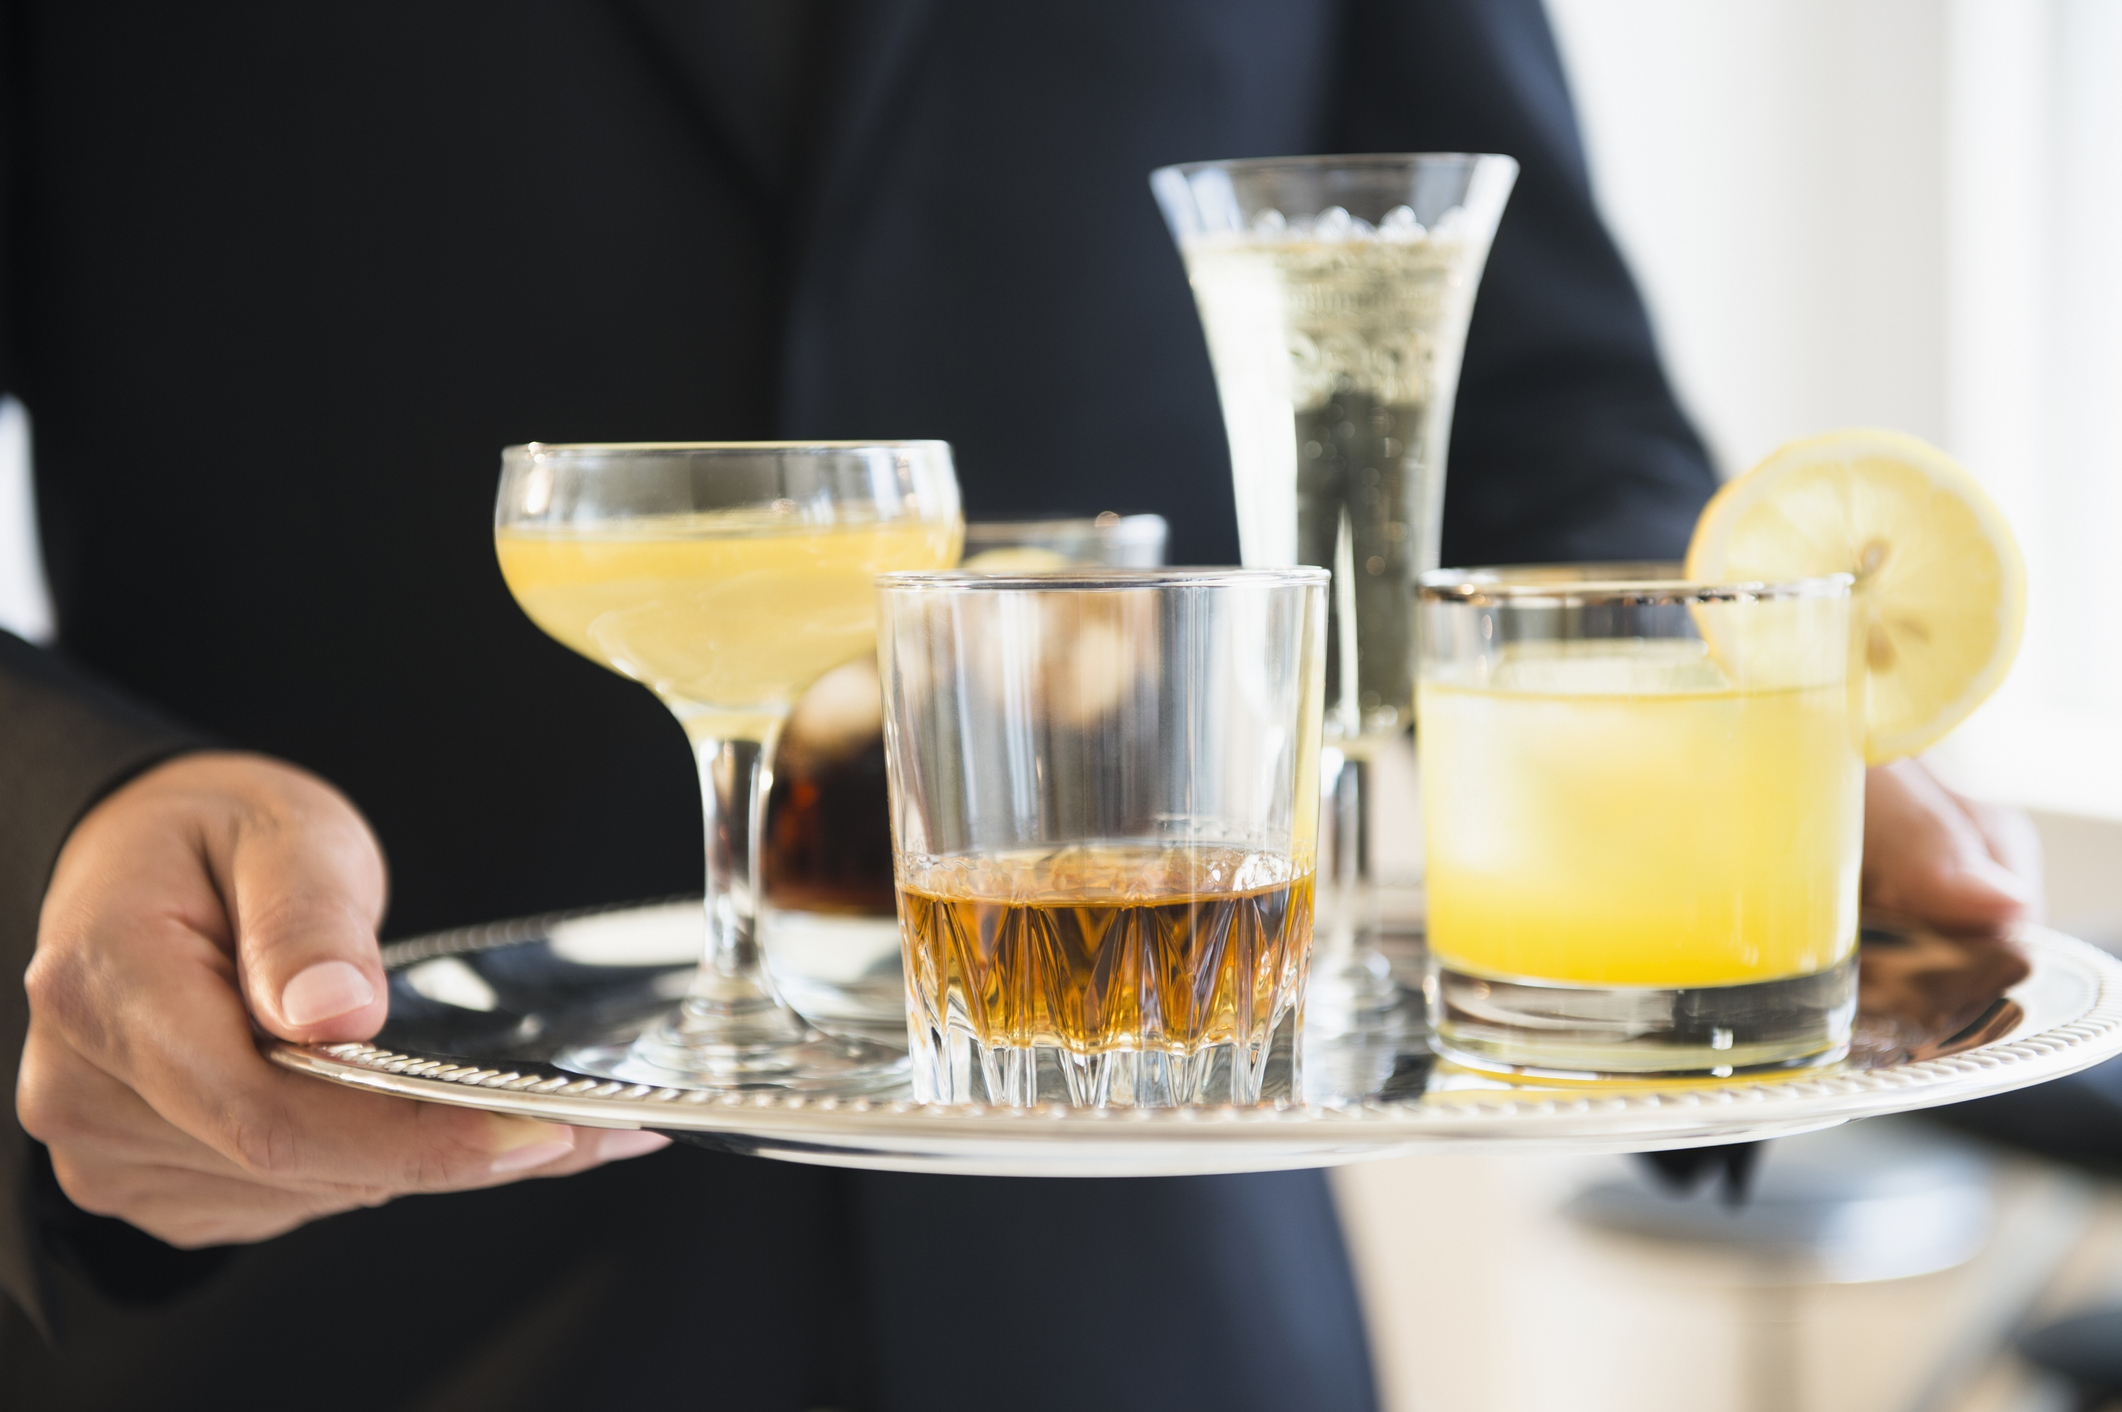 Article image for Calorific drinks: Making better alcohol choices during the Christmas season